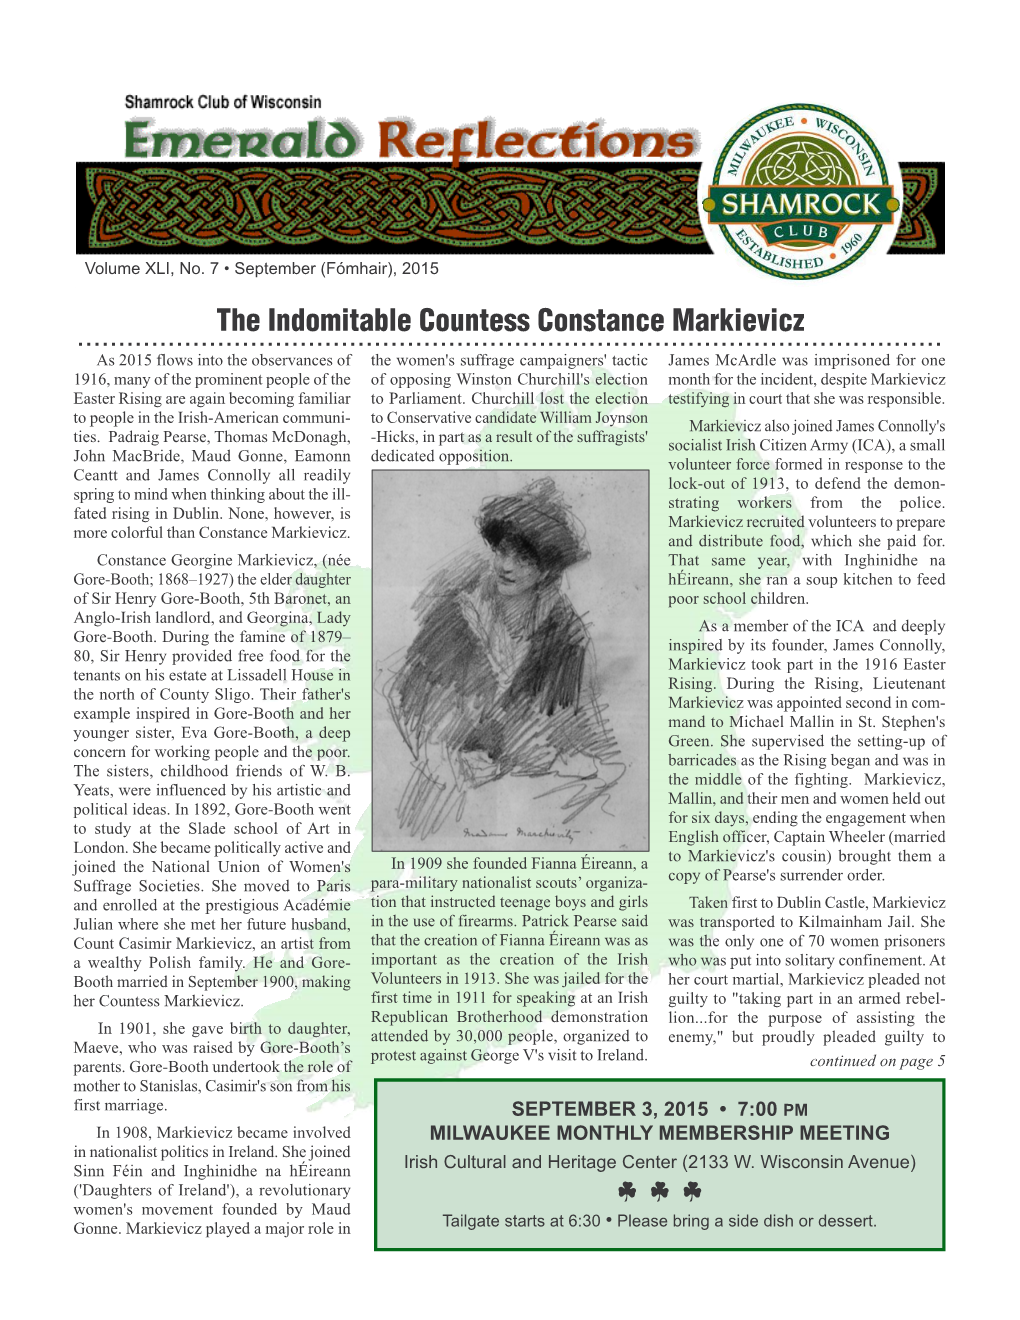 The Indomitable Countess Constance Markievicz